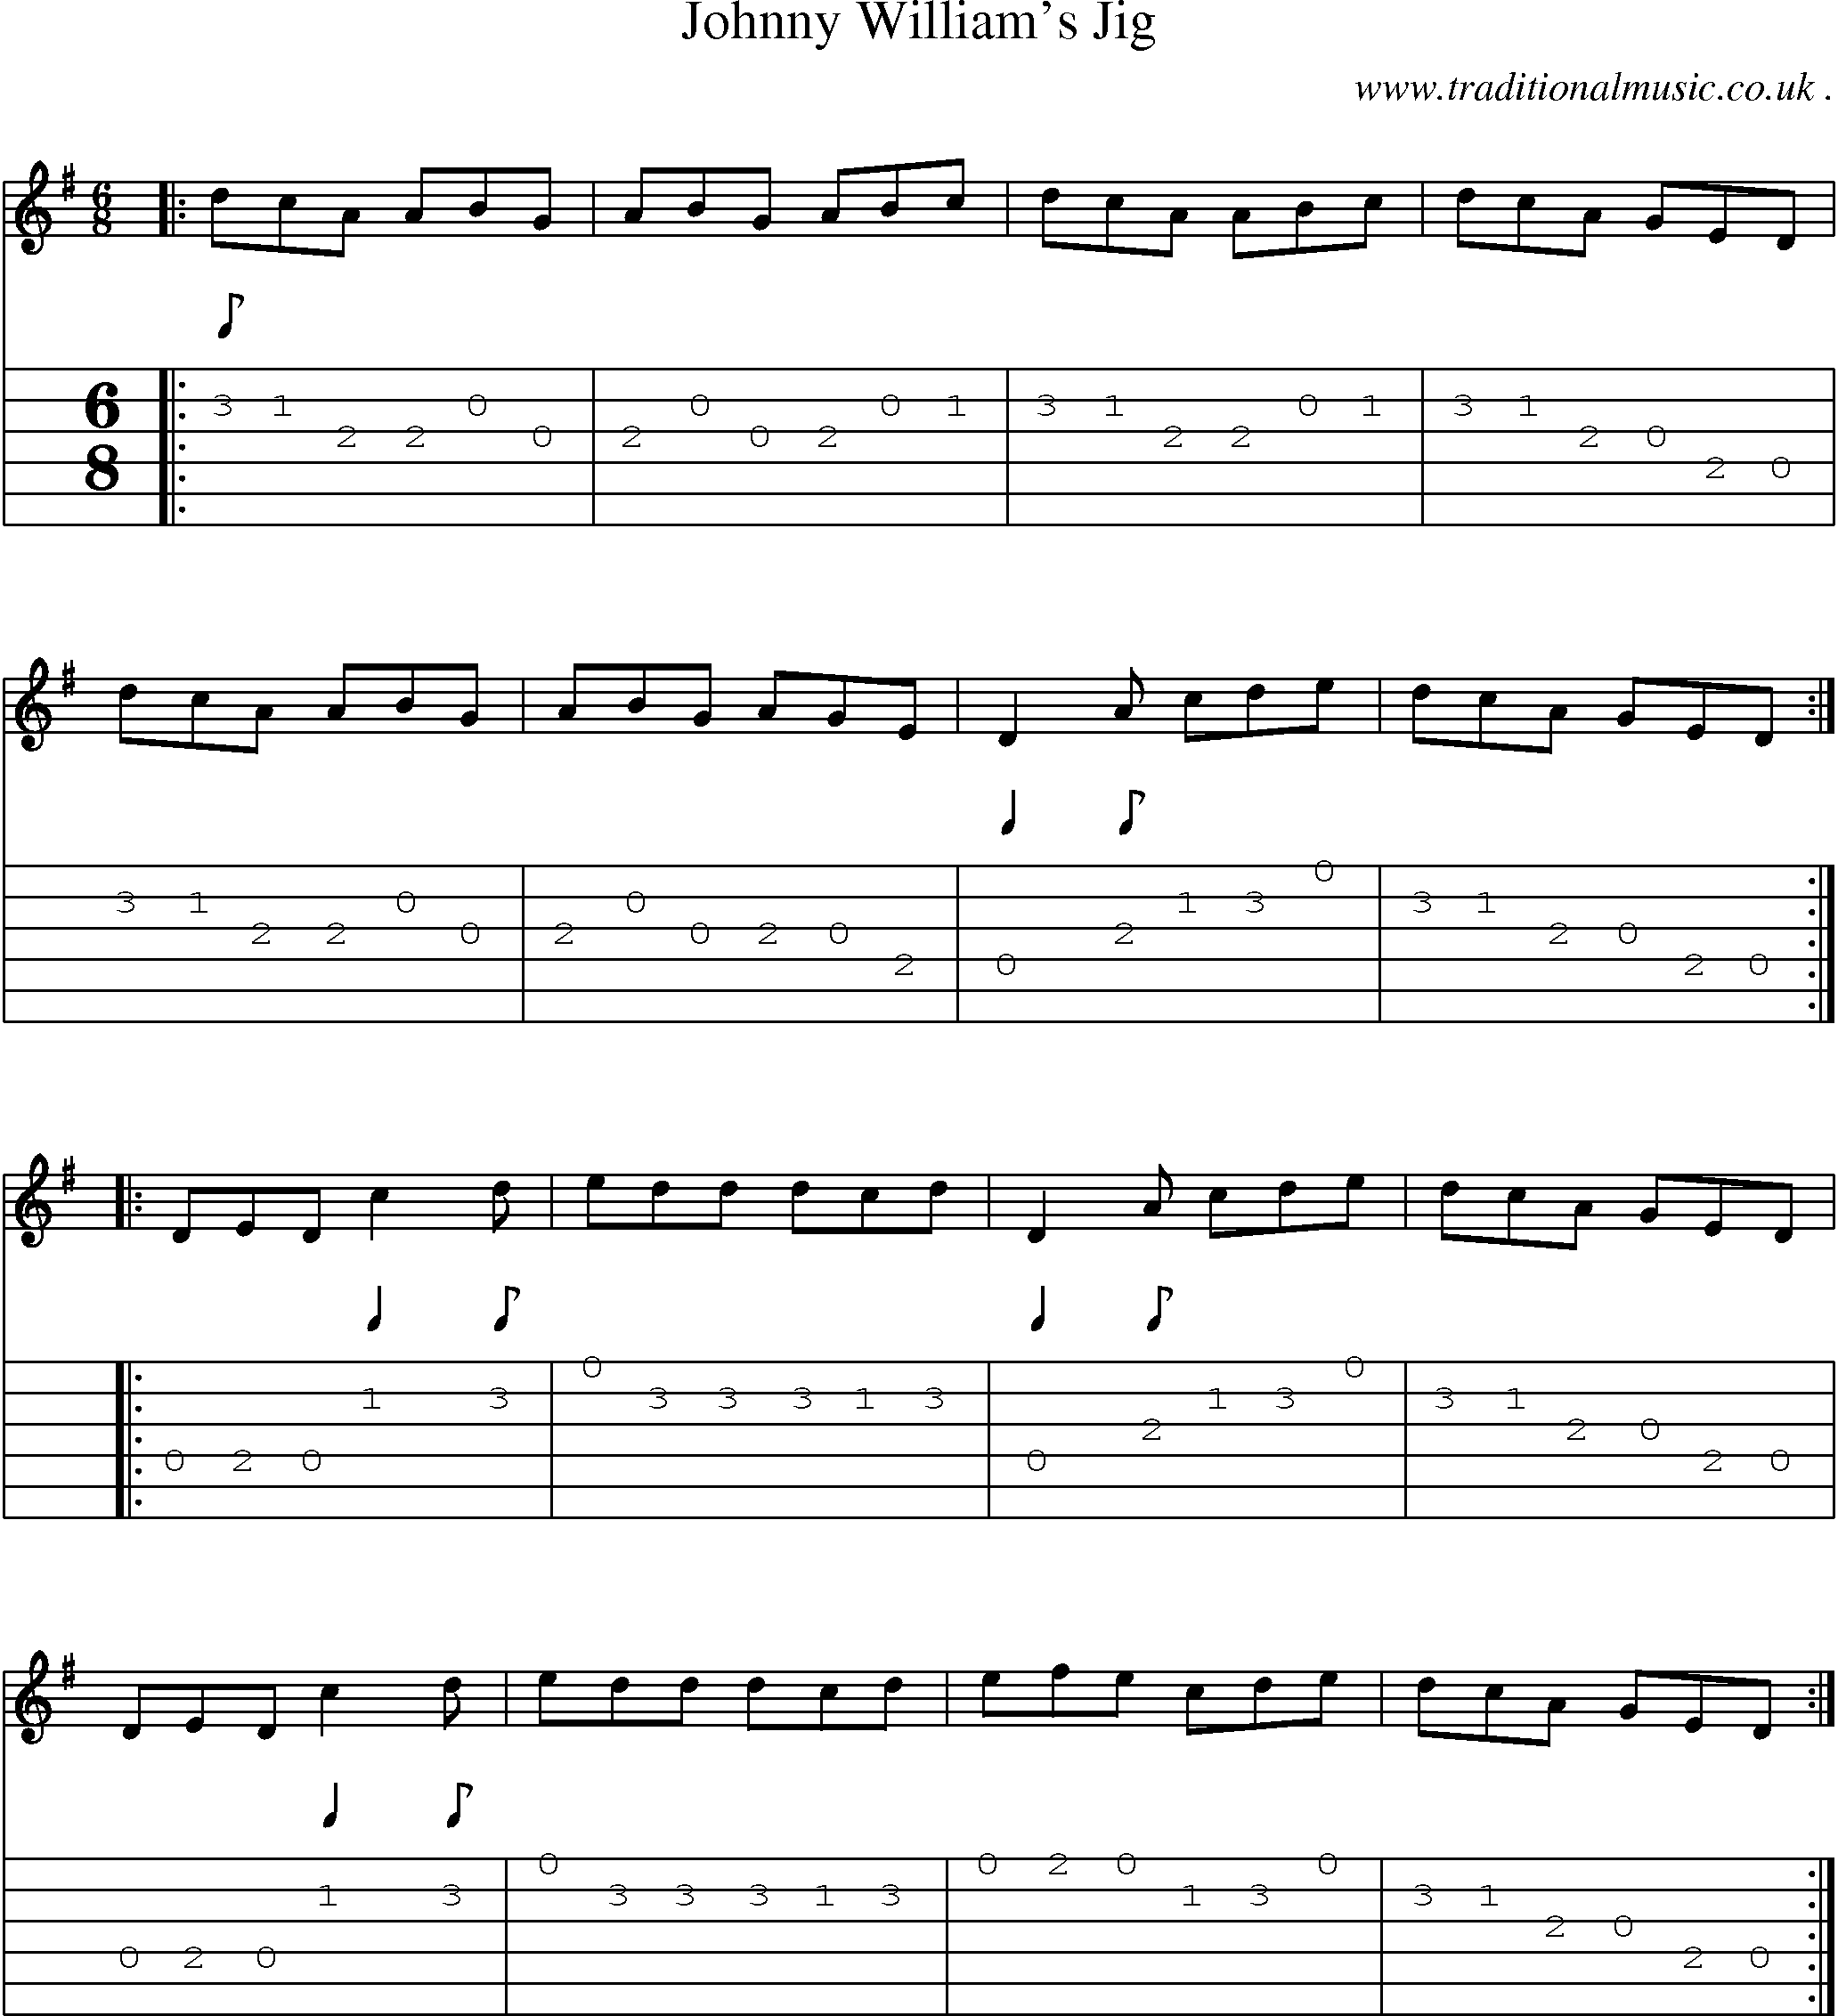 Sheet-Music and Guitar Tabs for Johnny Williams Jig